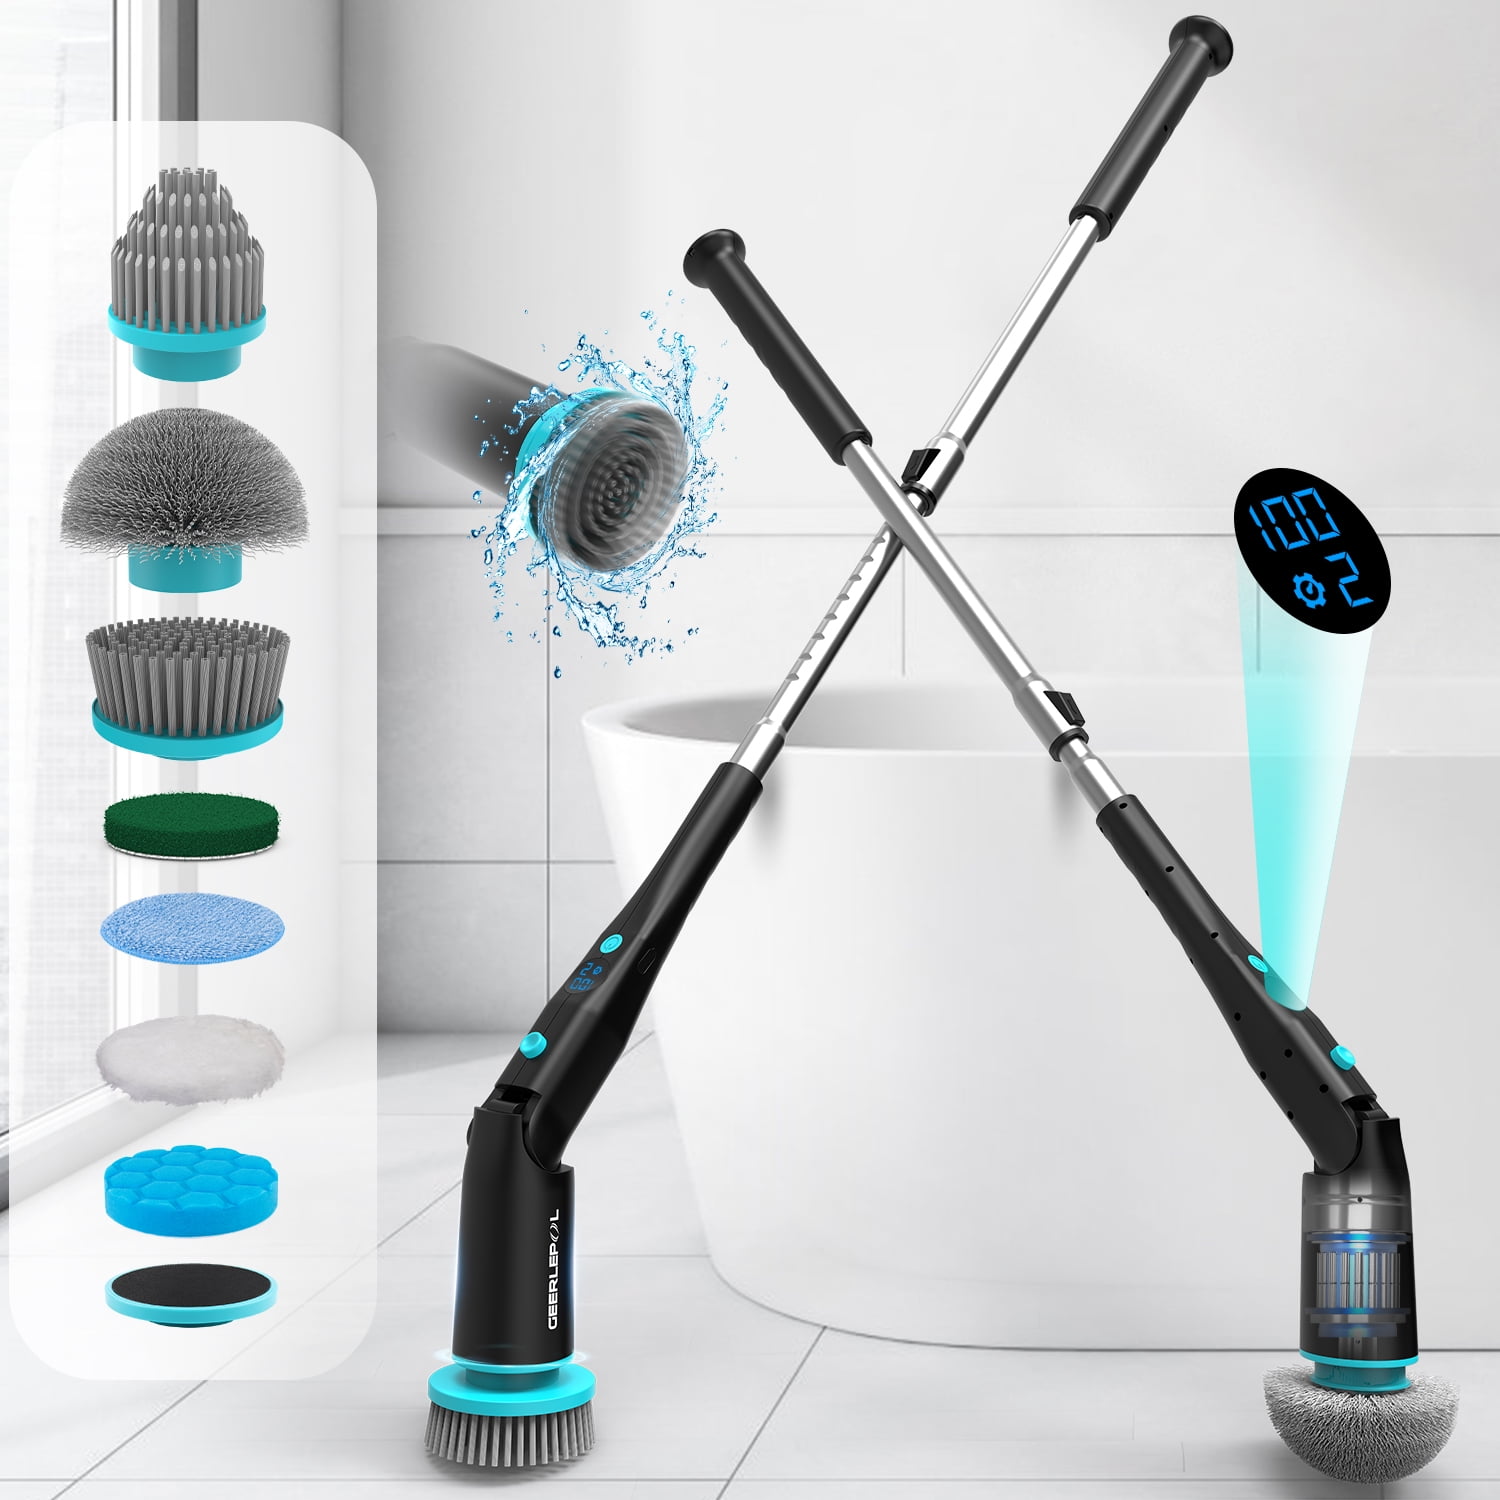 Amiluo Electric Scrubber with 2 Batteries, 1200RPM Electric Spin